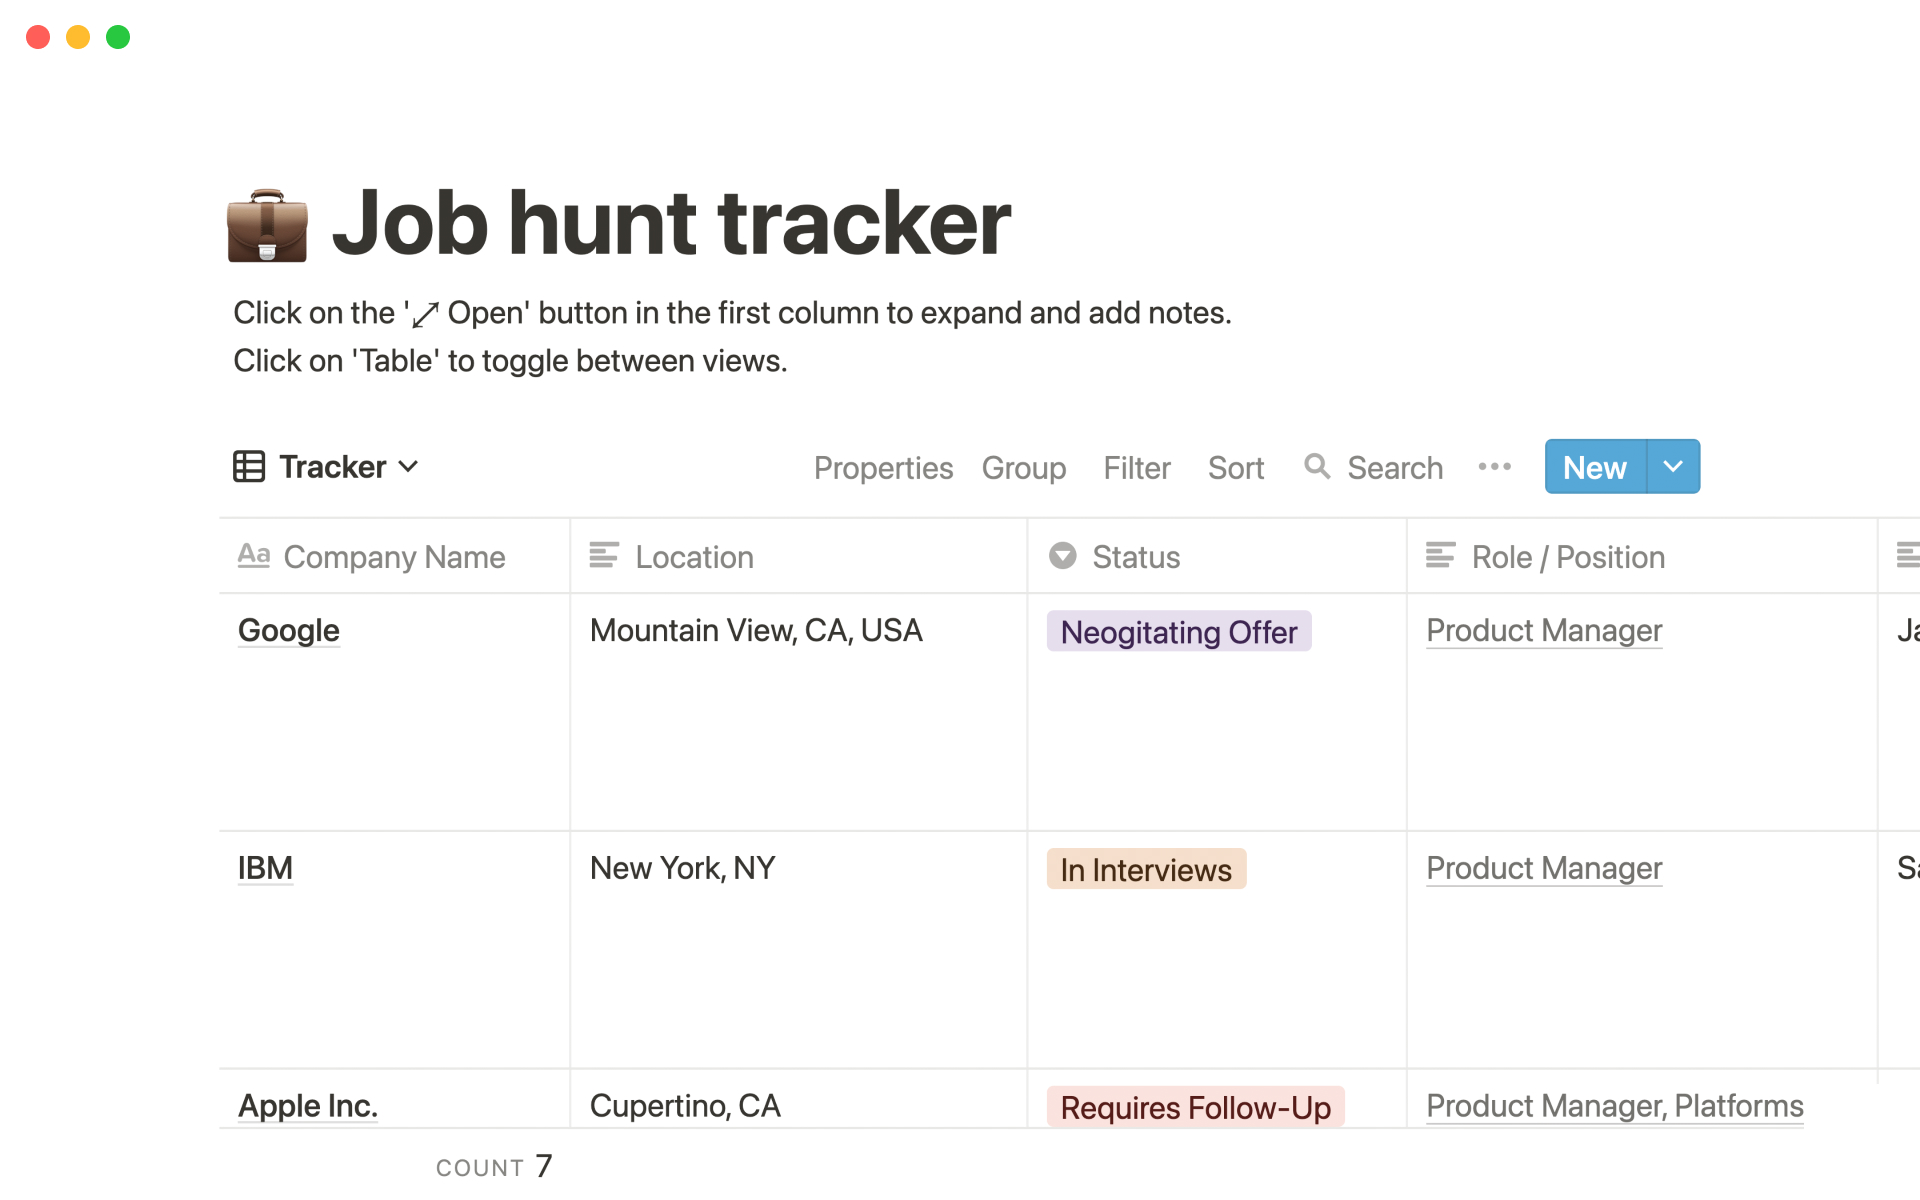 Keep track of any job postings you're interested in, which ones you've applied to, and where you're at in the interview process.